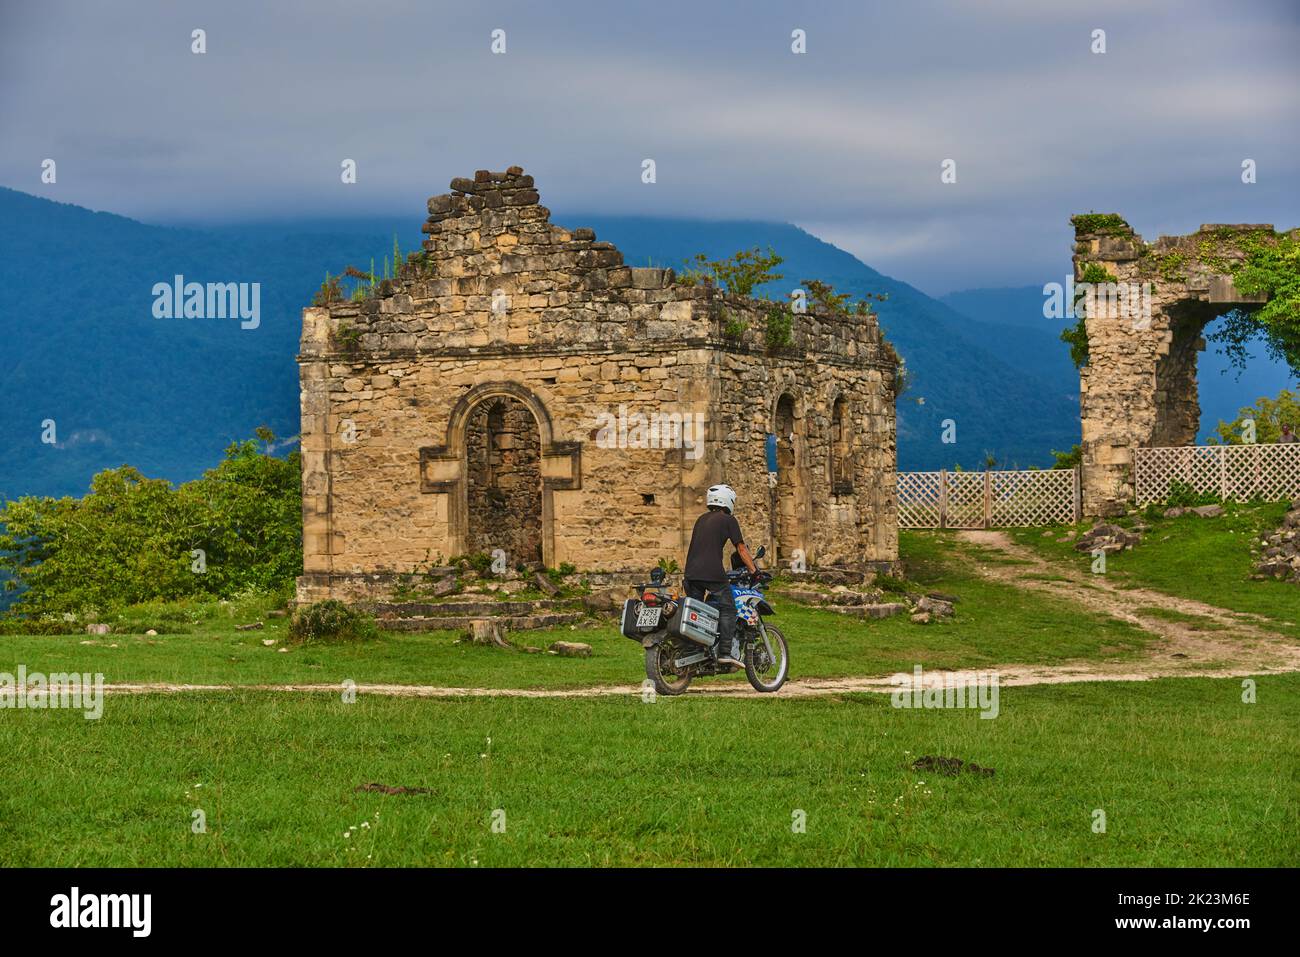 A man on a motorcycle rides along a dirt road among green grass to the ruins of an ancient Bedia temple. Stock Photo